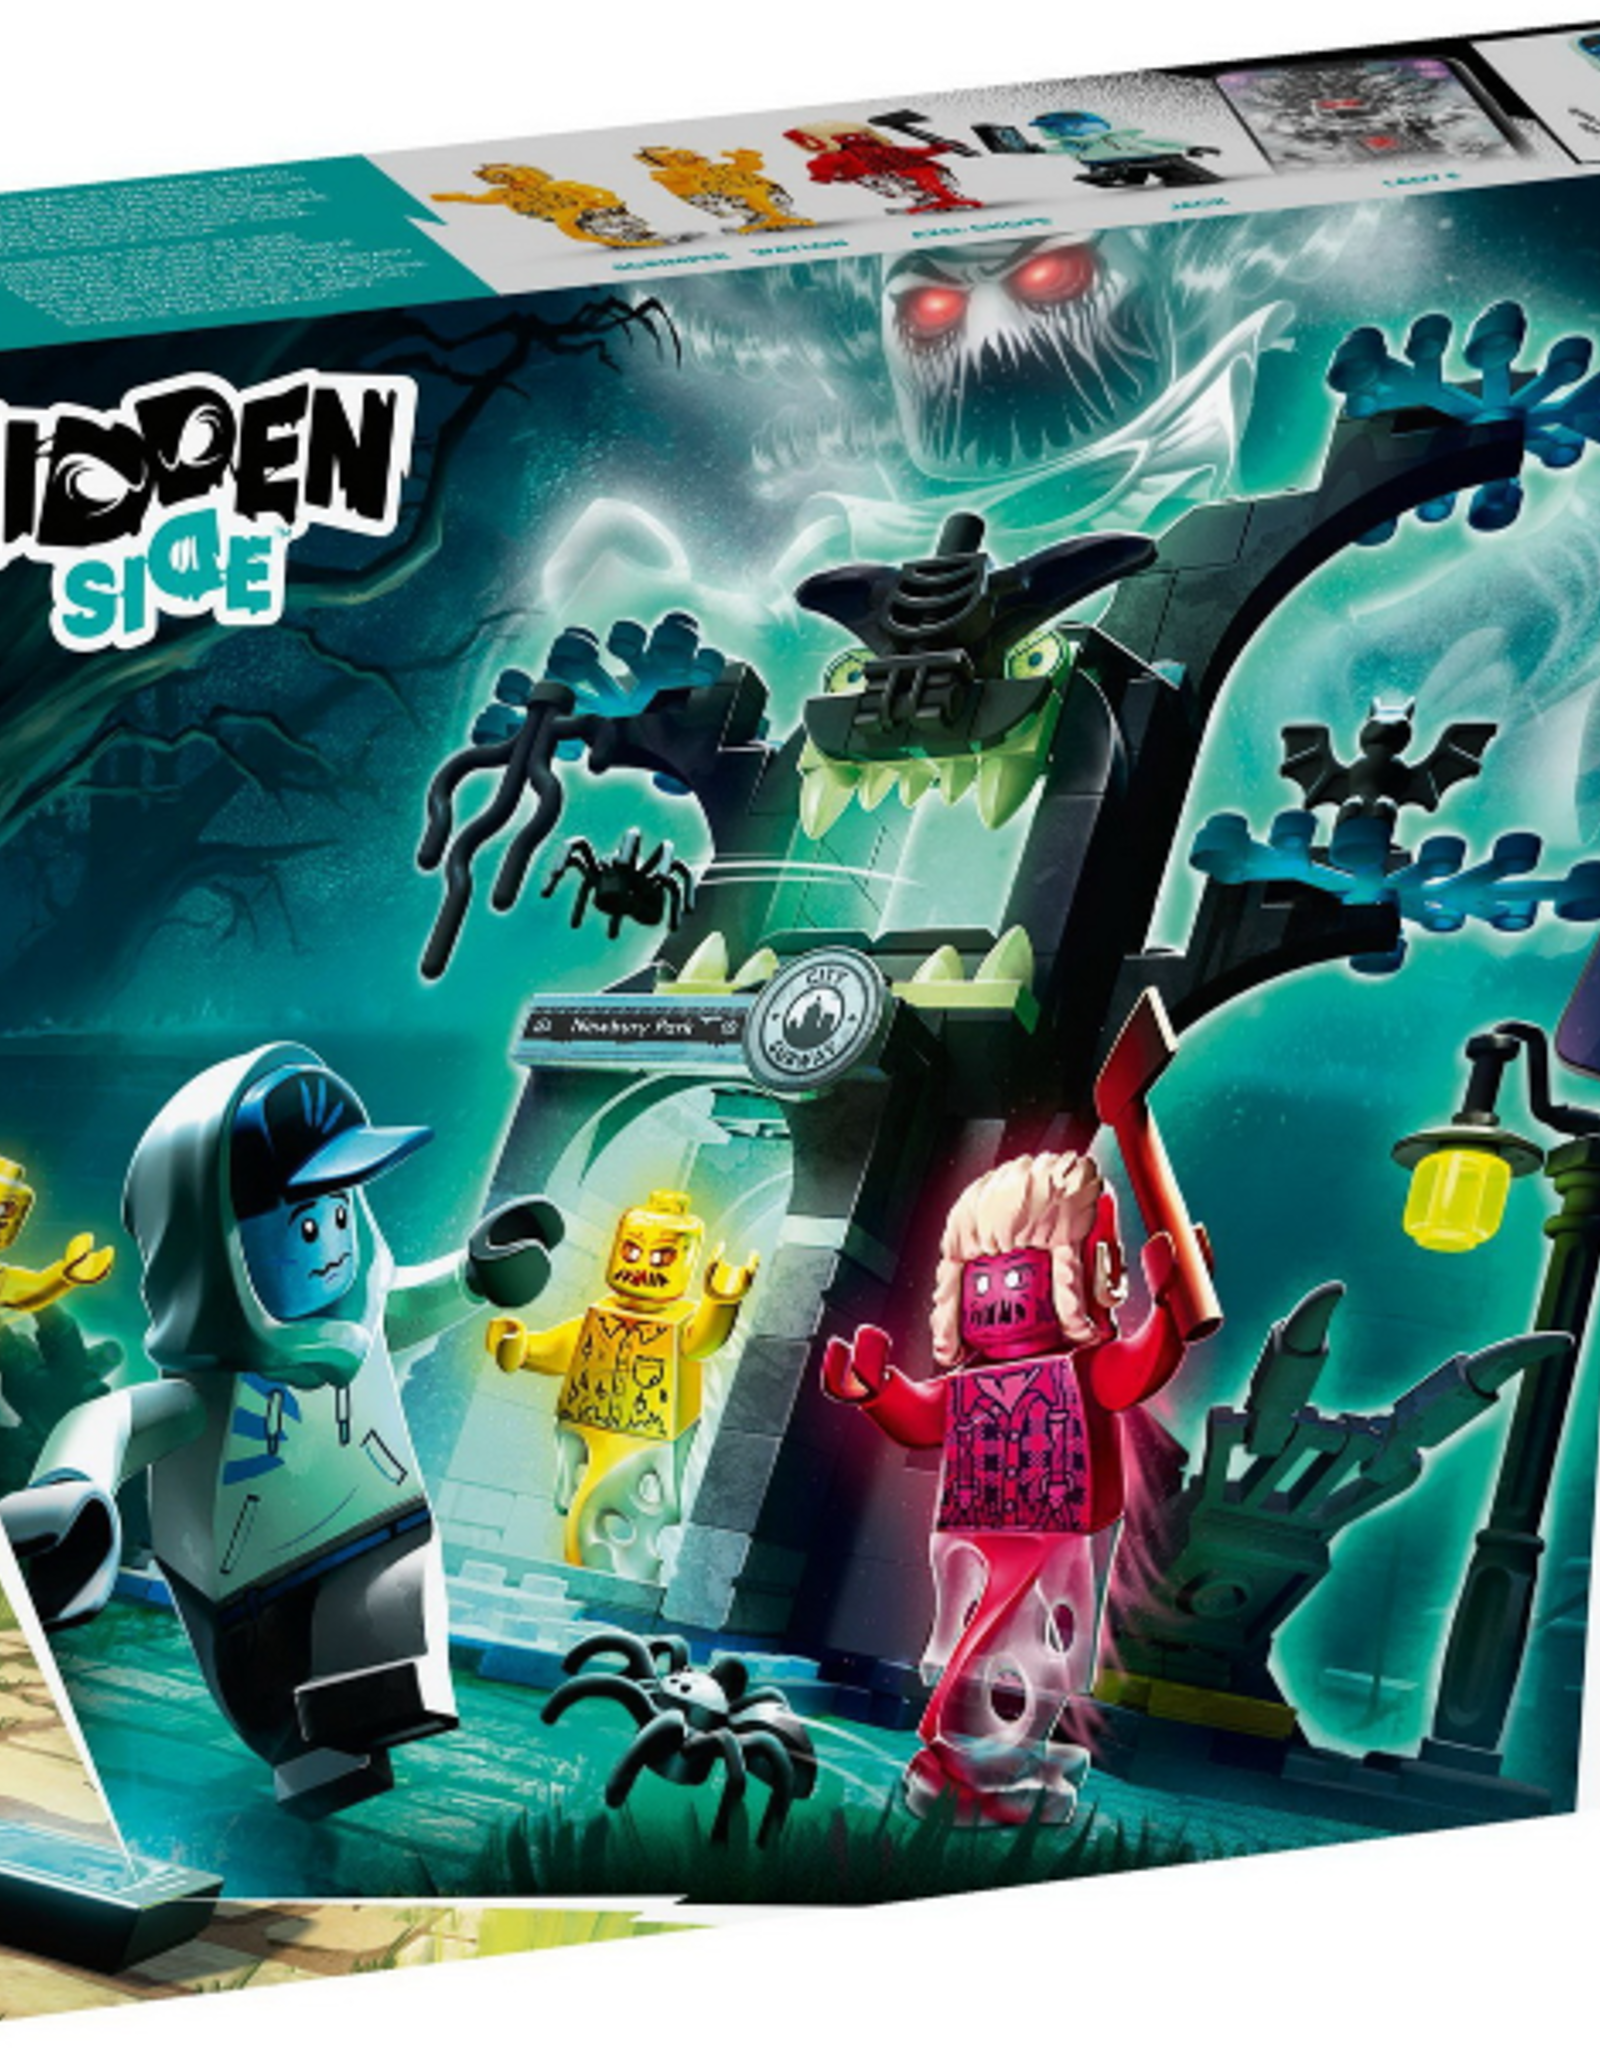 LEGO LEGO 70427 Welcome to the Hidden Side - HIDDEN SIDE